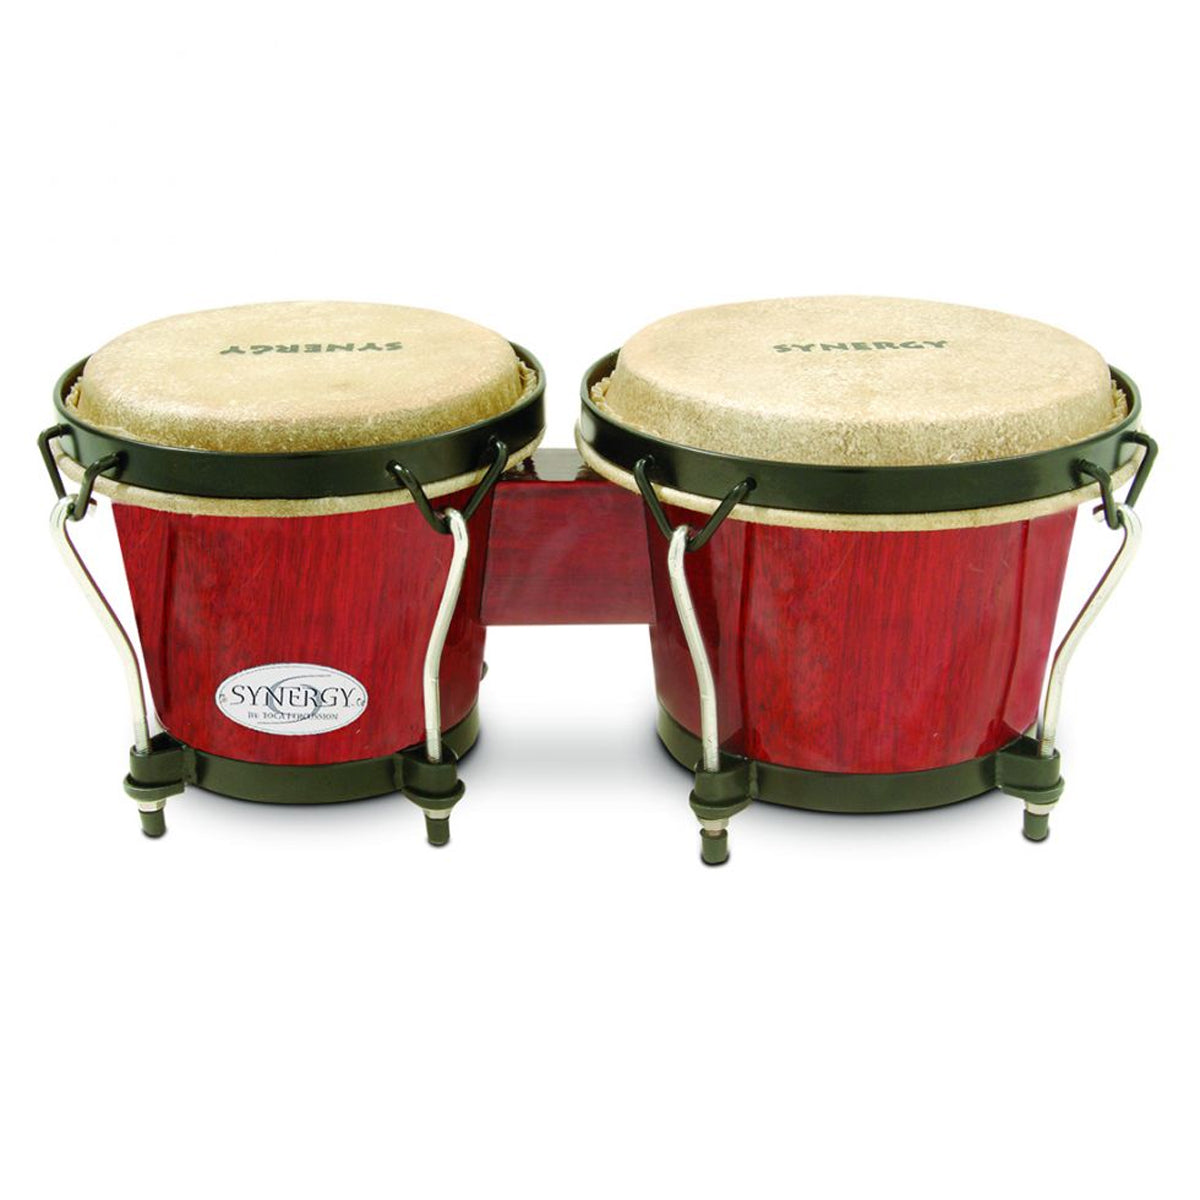 Toca Synergy Wood Bongos in Rio Red